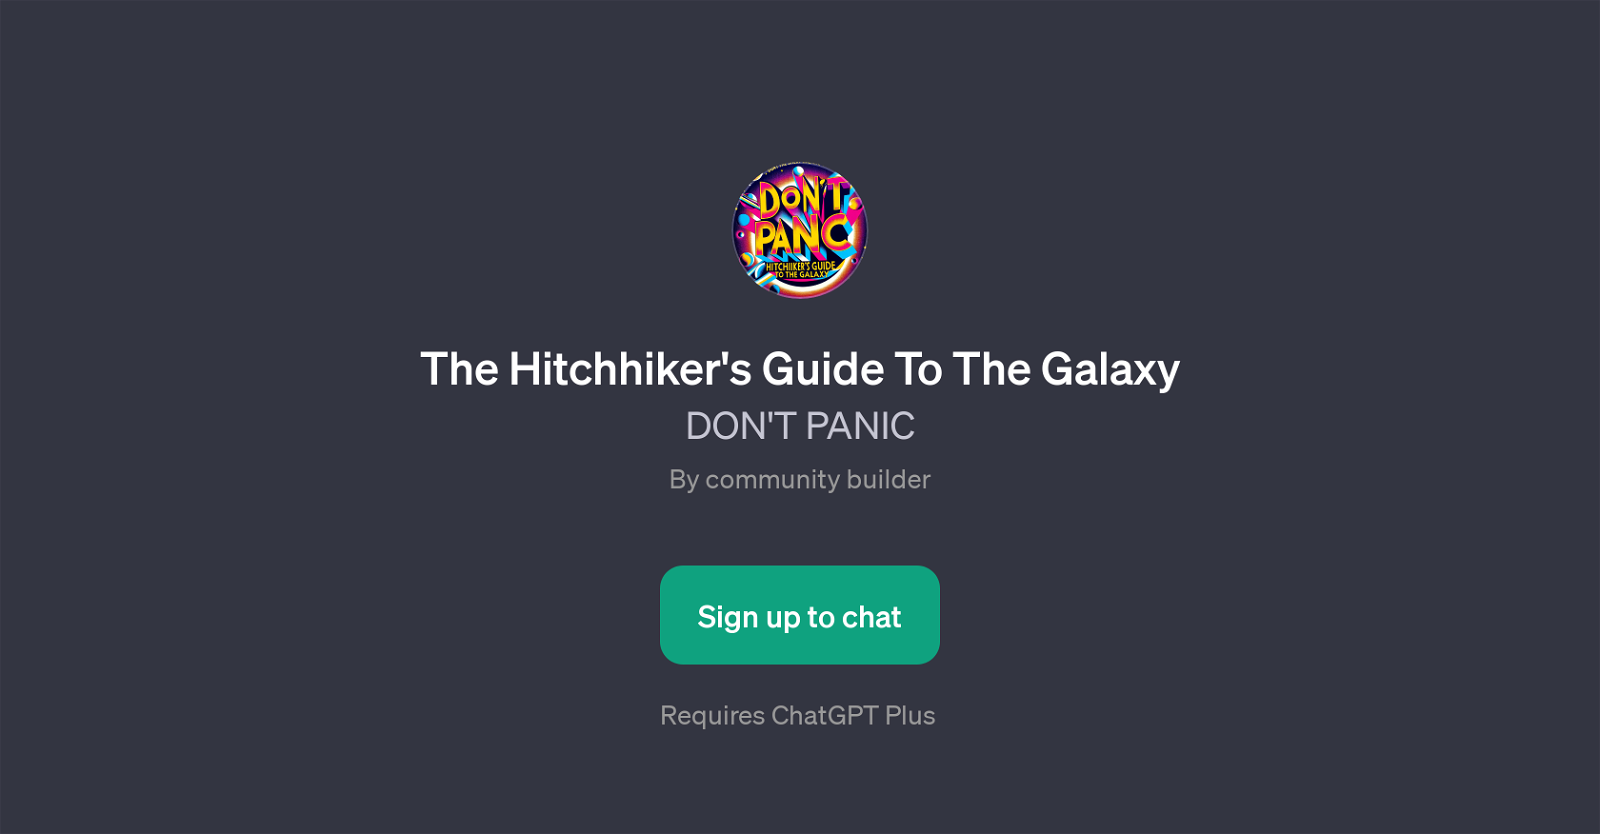 The Hitchhiker's Guide To The Galaxy website